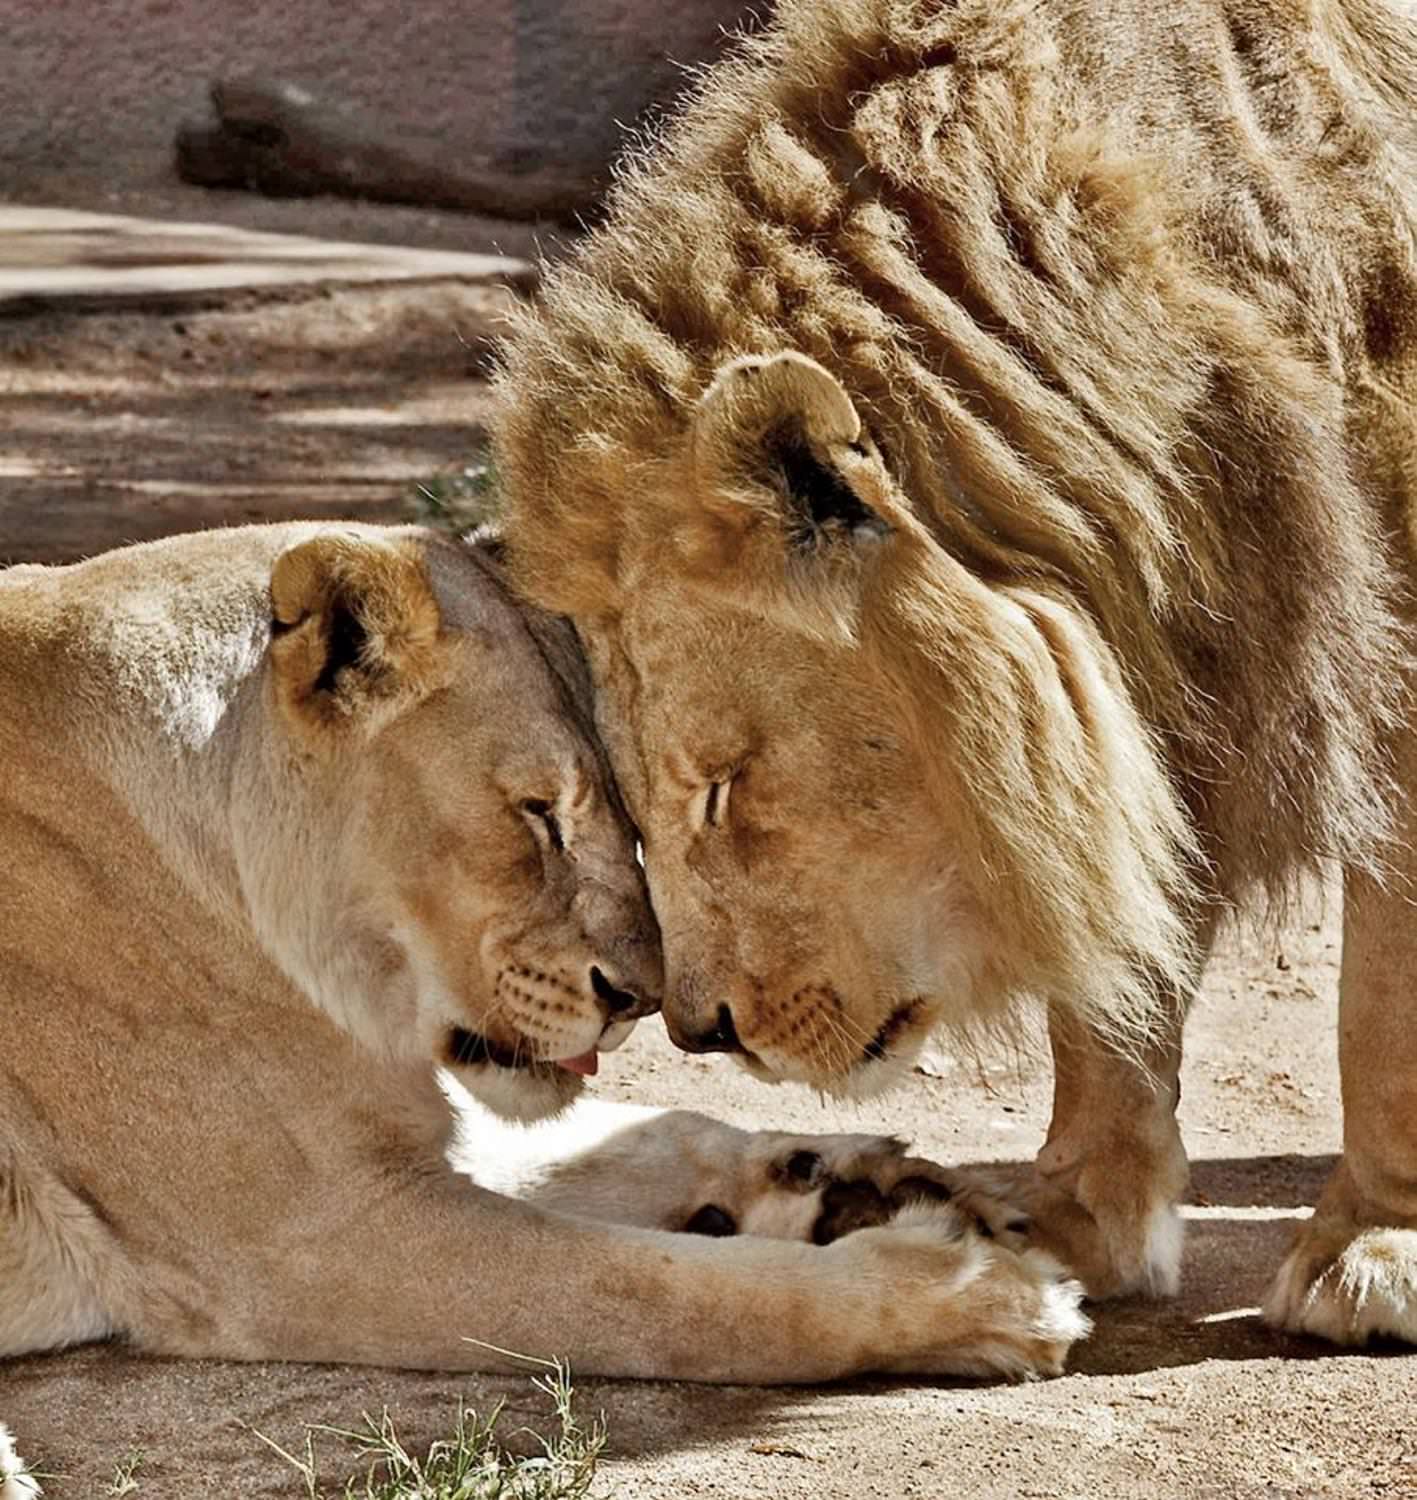 Two African lions in love at the zoo / Hubert and Kalisa